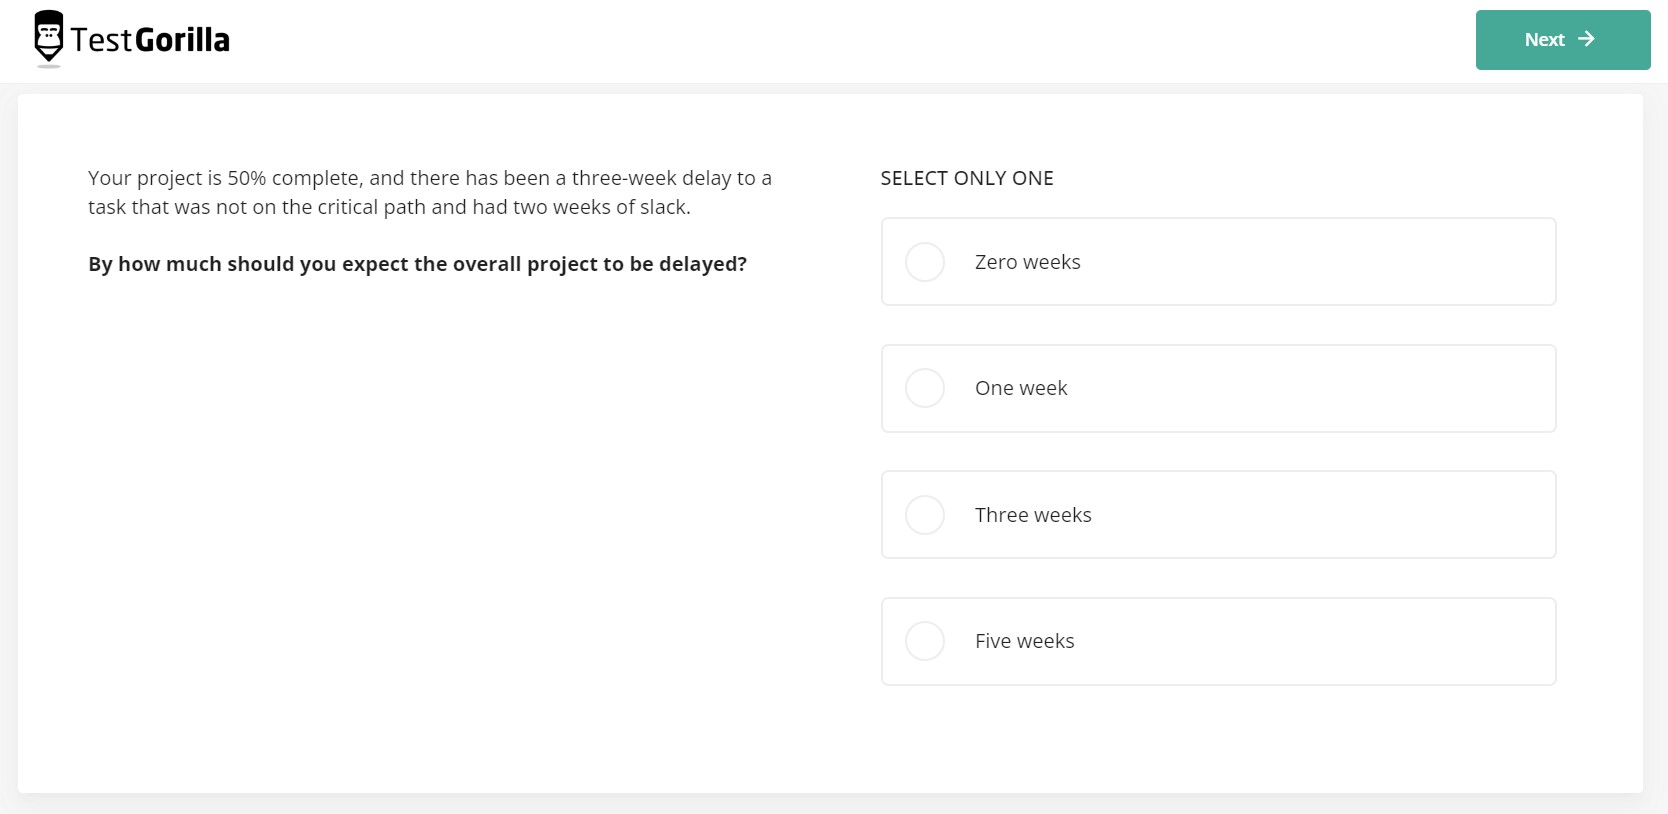 An example question from TestGorilla's Project Management test